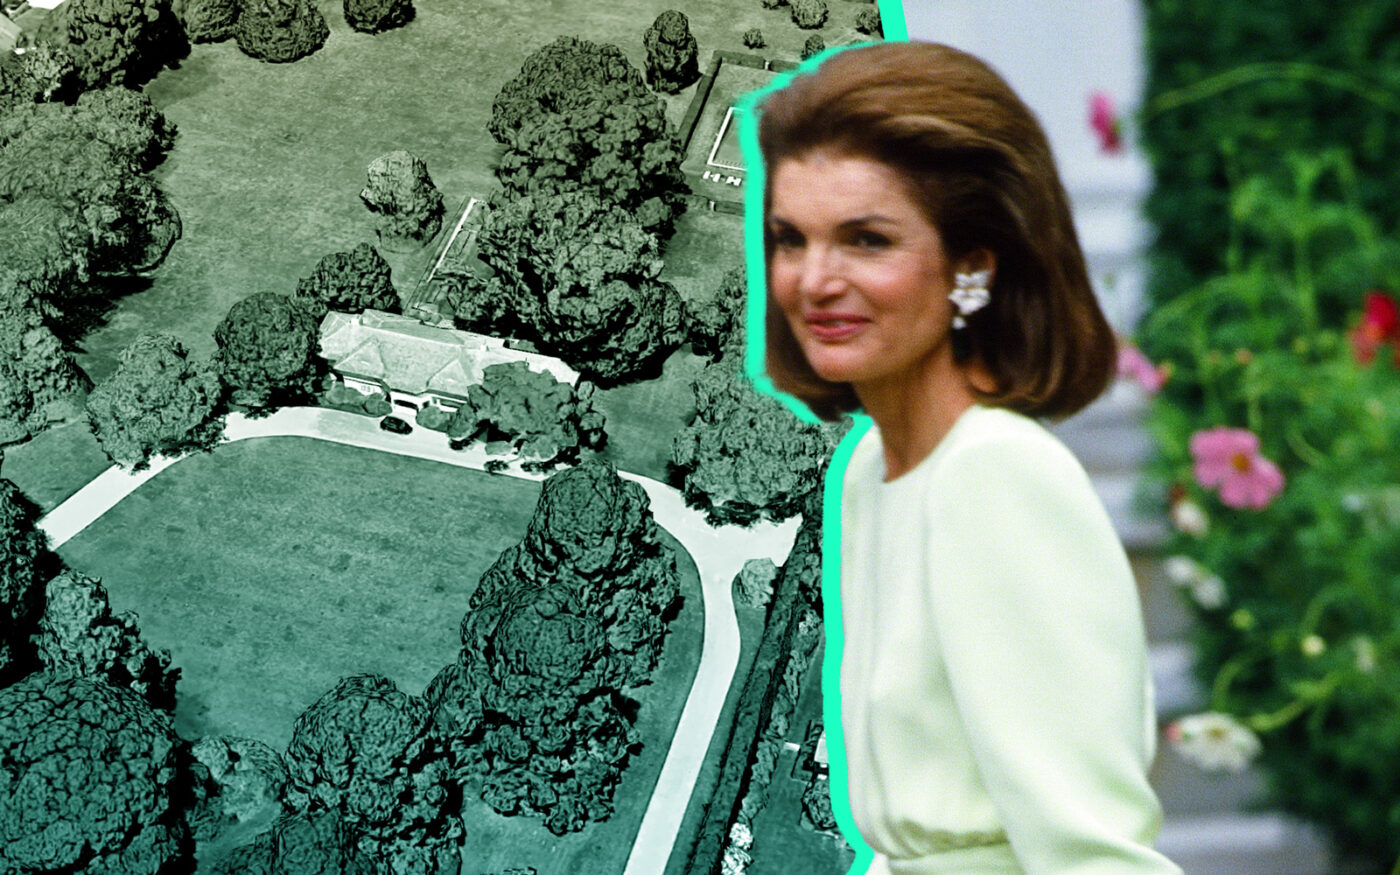 Jackie Kennedy Onassis’ Hamptons Home Sold for $52 Million